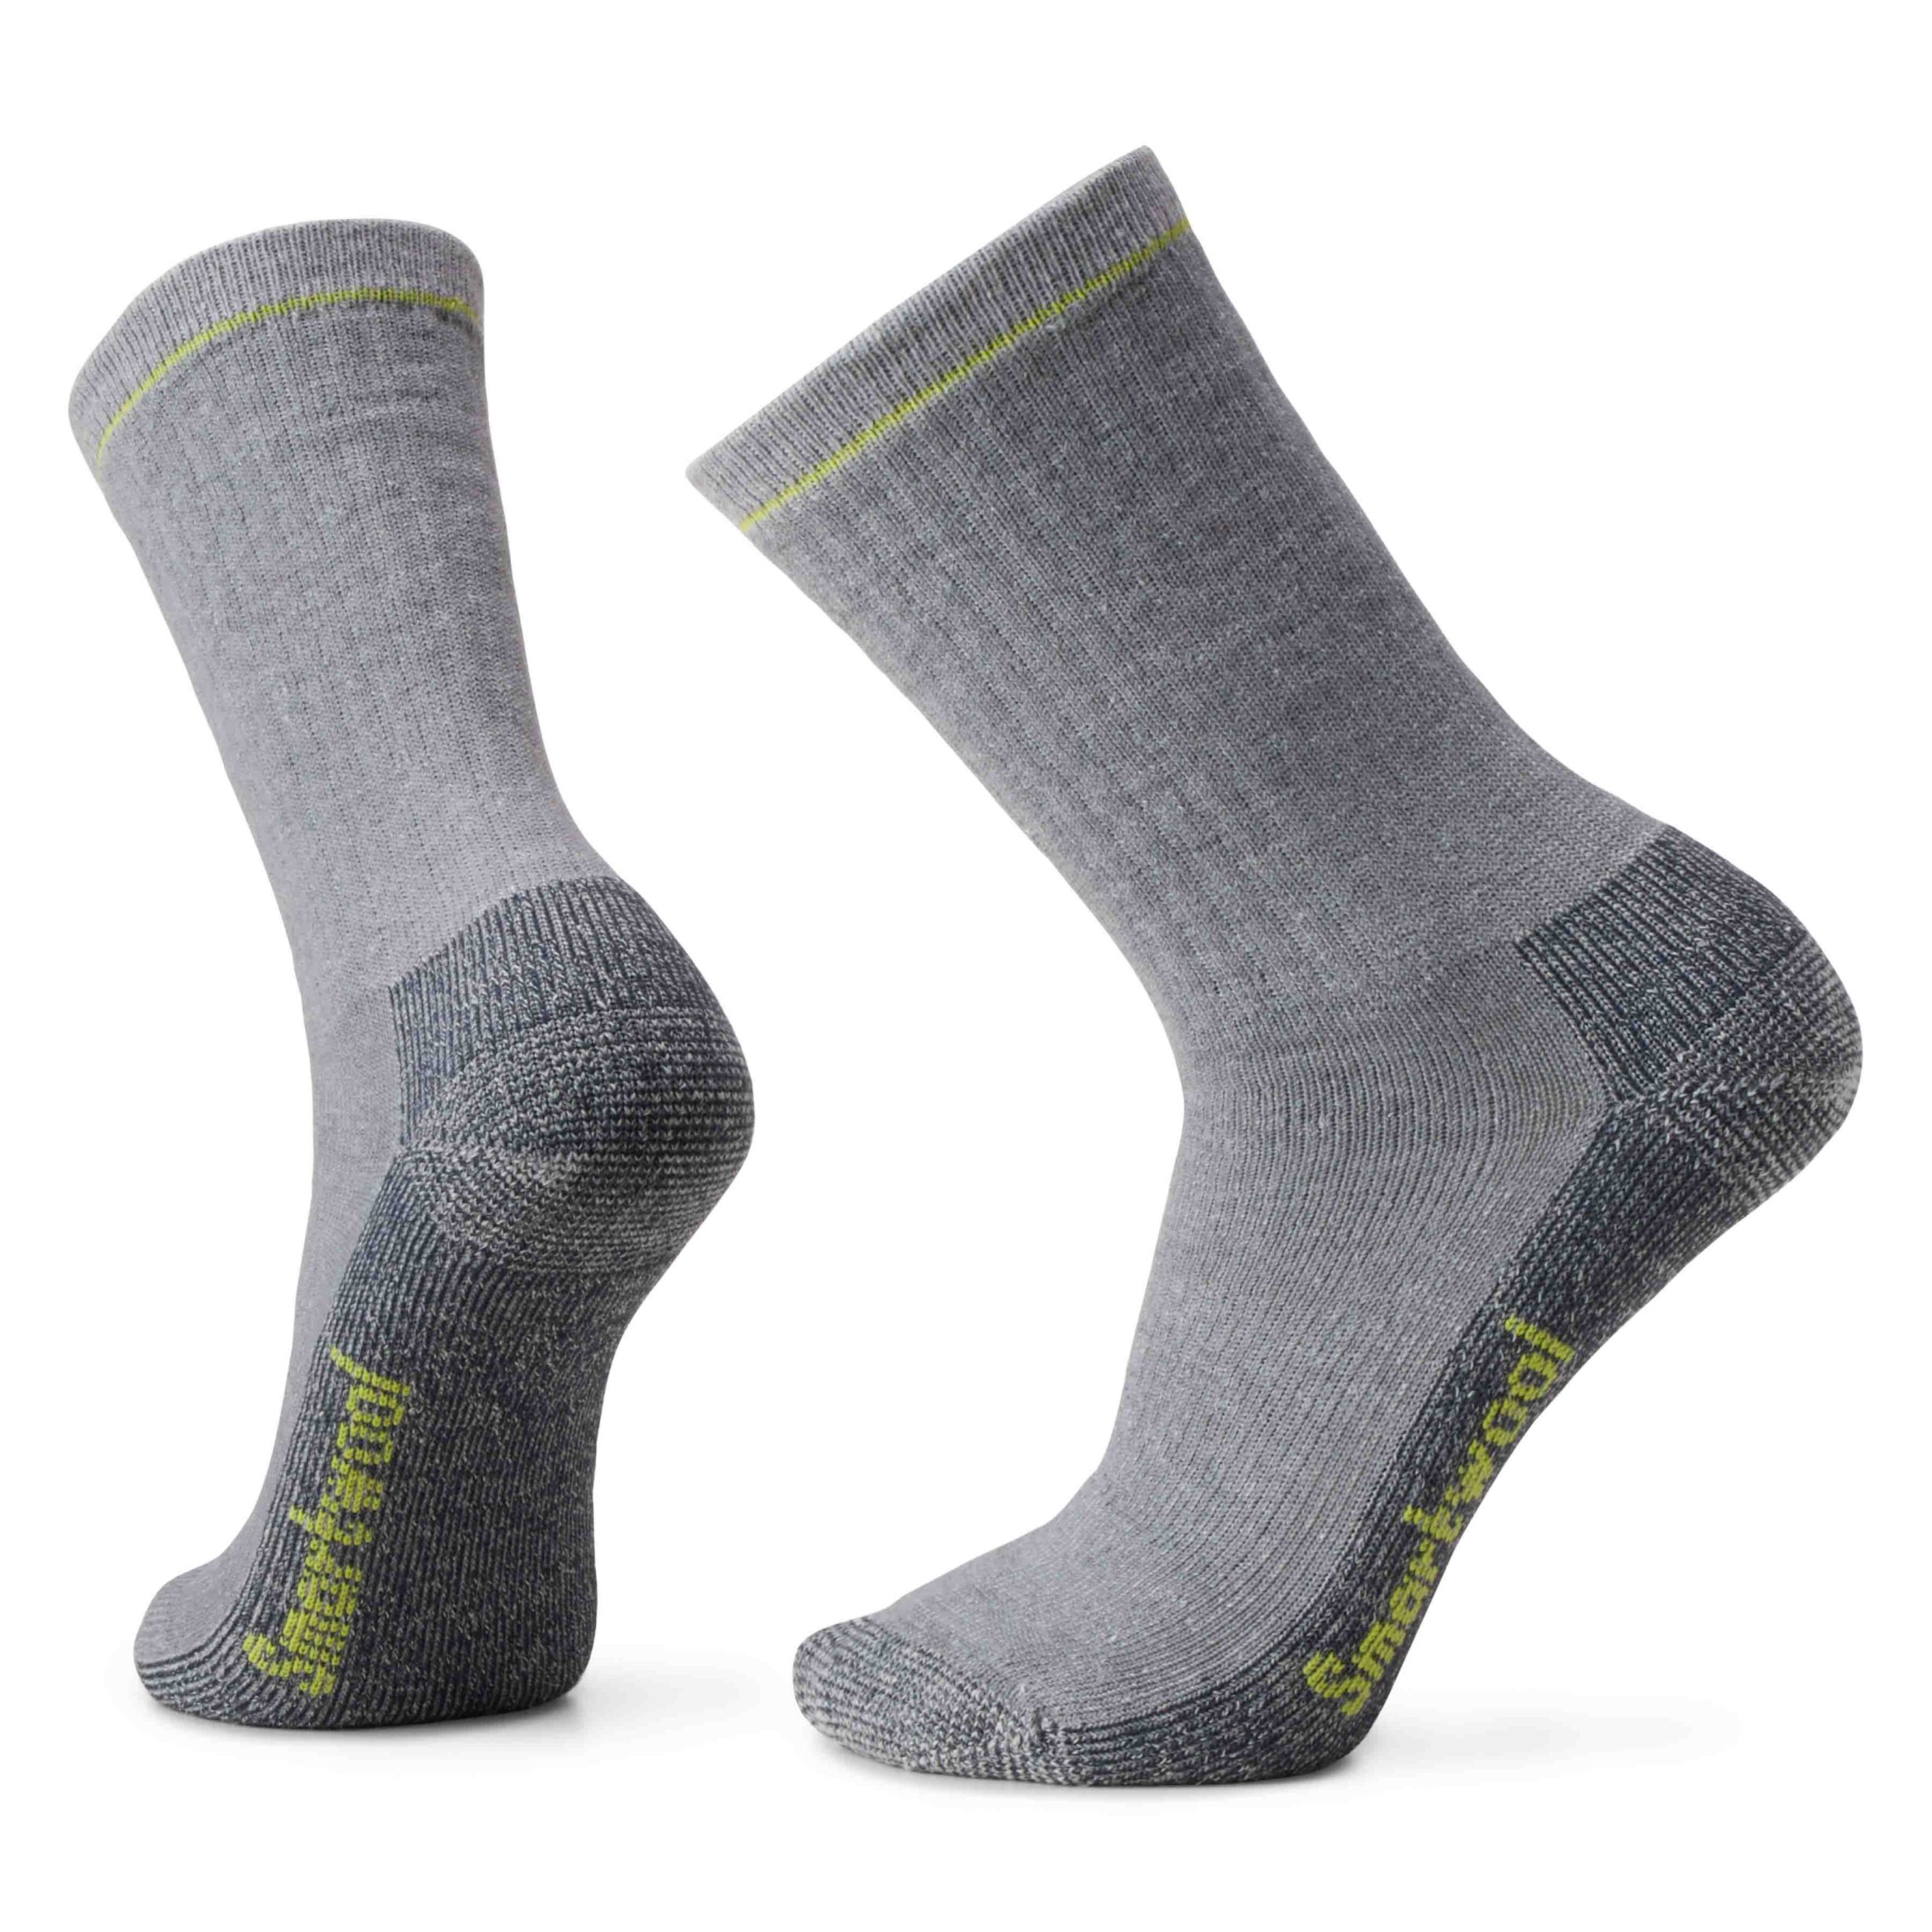 Smartwool launches ‘first’ circular sock in bid to go beyond recycling ...